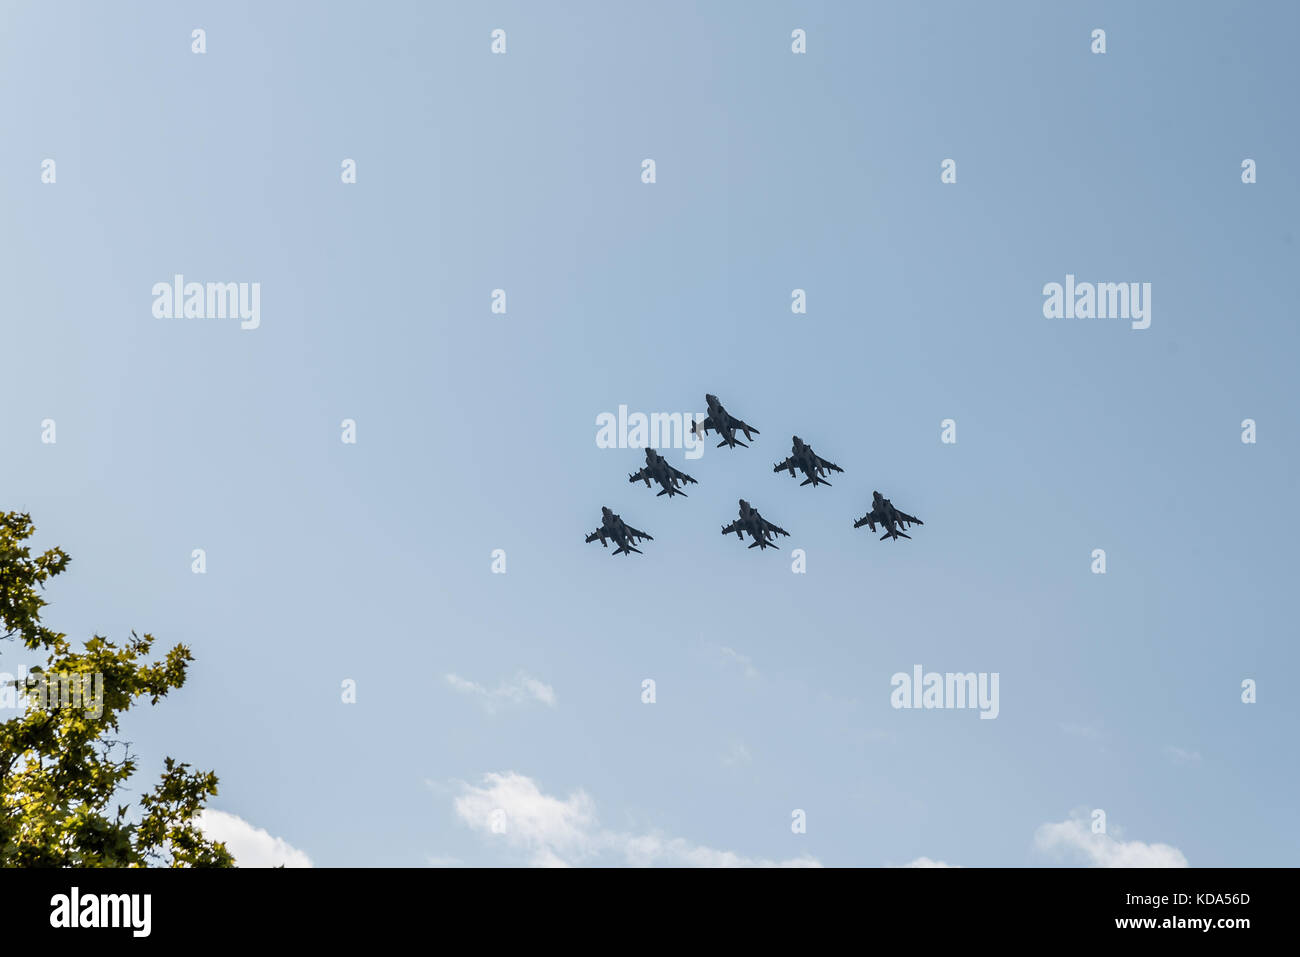 Madrid, Spain - October 12, 2017: Six Harrier EAV-8B jet fighters  flying in Spanish National Day Parade. Several troops take part in the army parade for Spain's National Day. King Felipe VI, Queen Letizia and Spanish Prime Minister Mariano Rajoy presided over the parade. Juan Jimenez/Alamy Live News Stock Photo